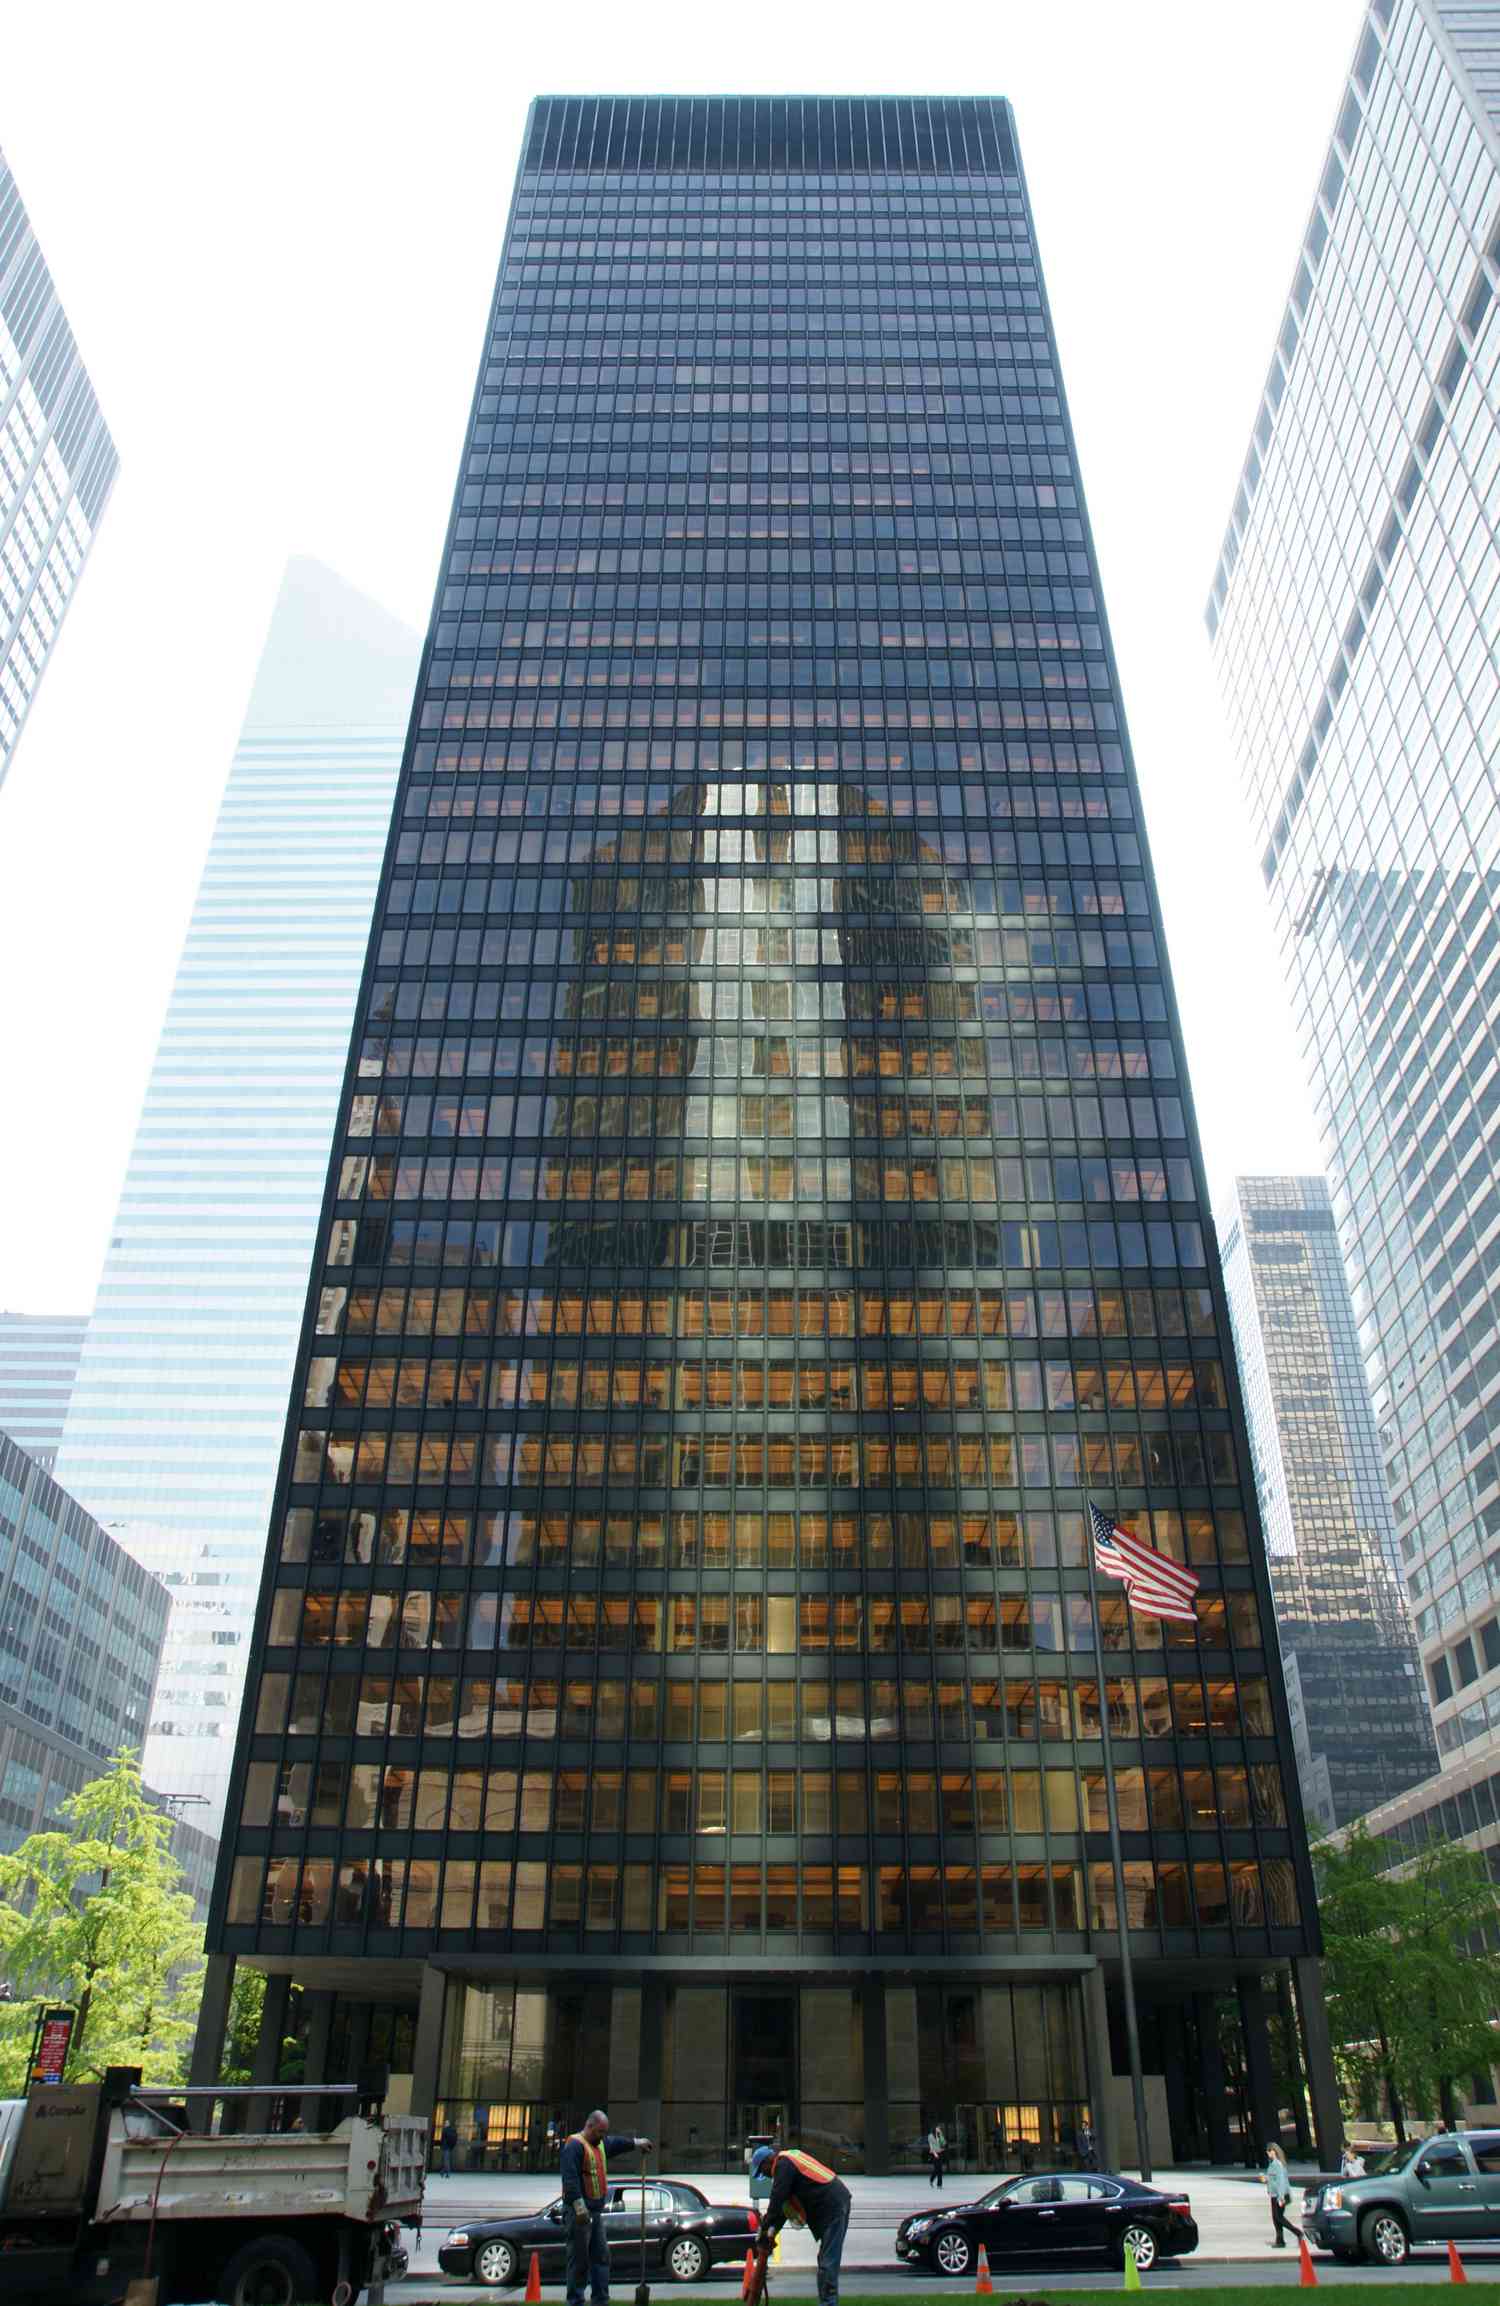 Seagram Building in NYC